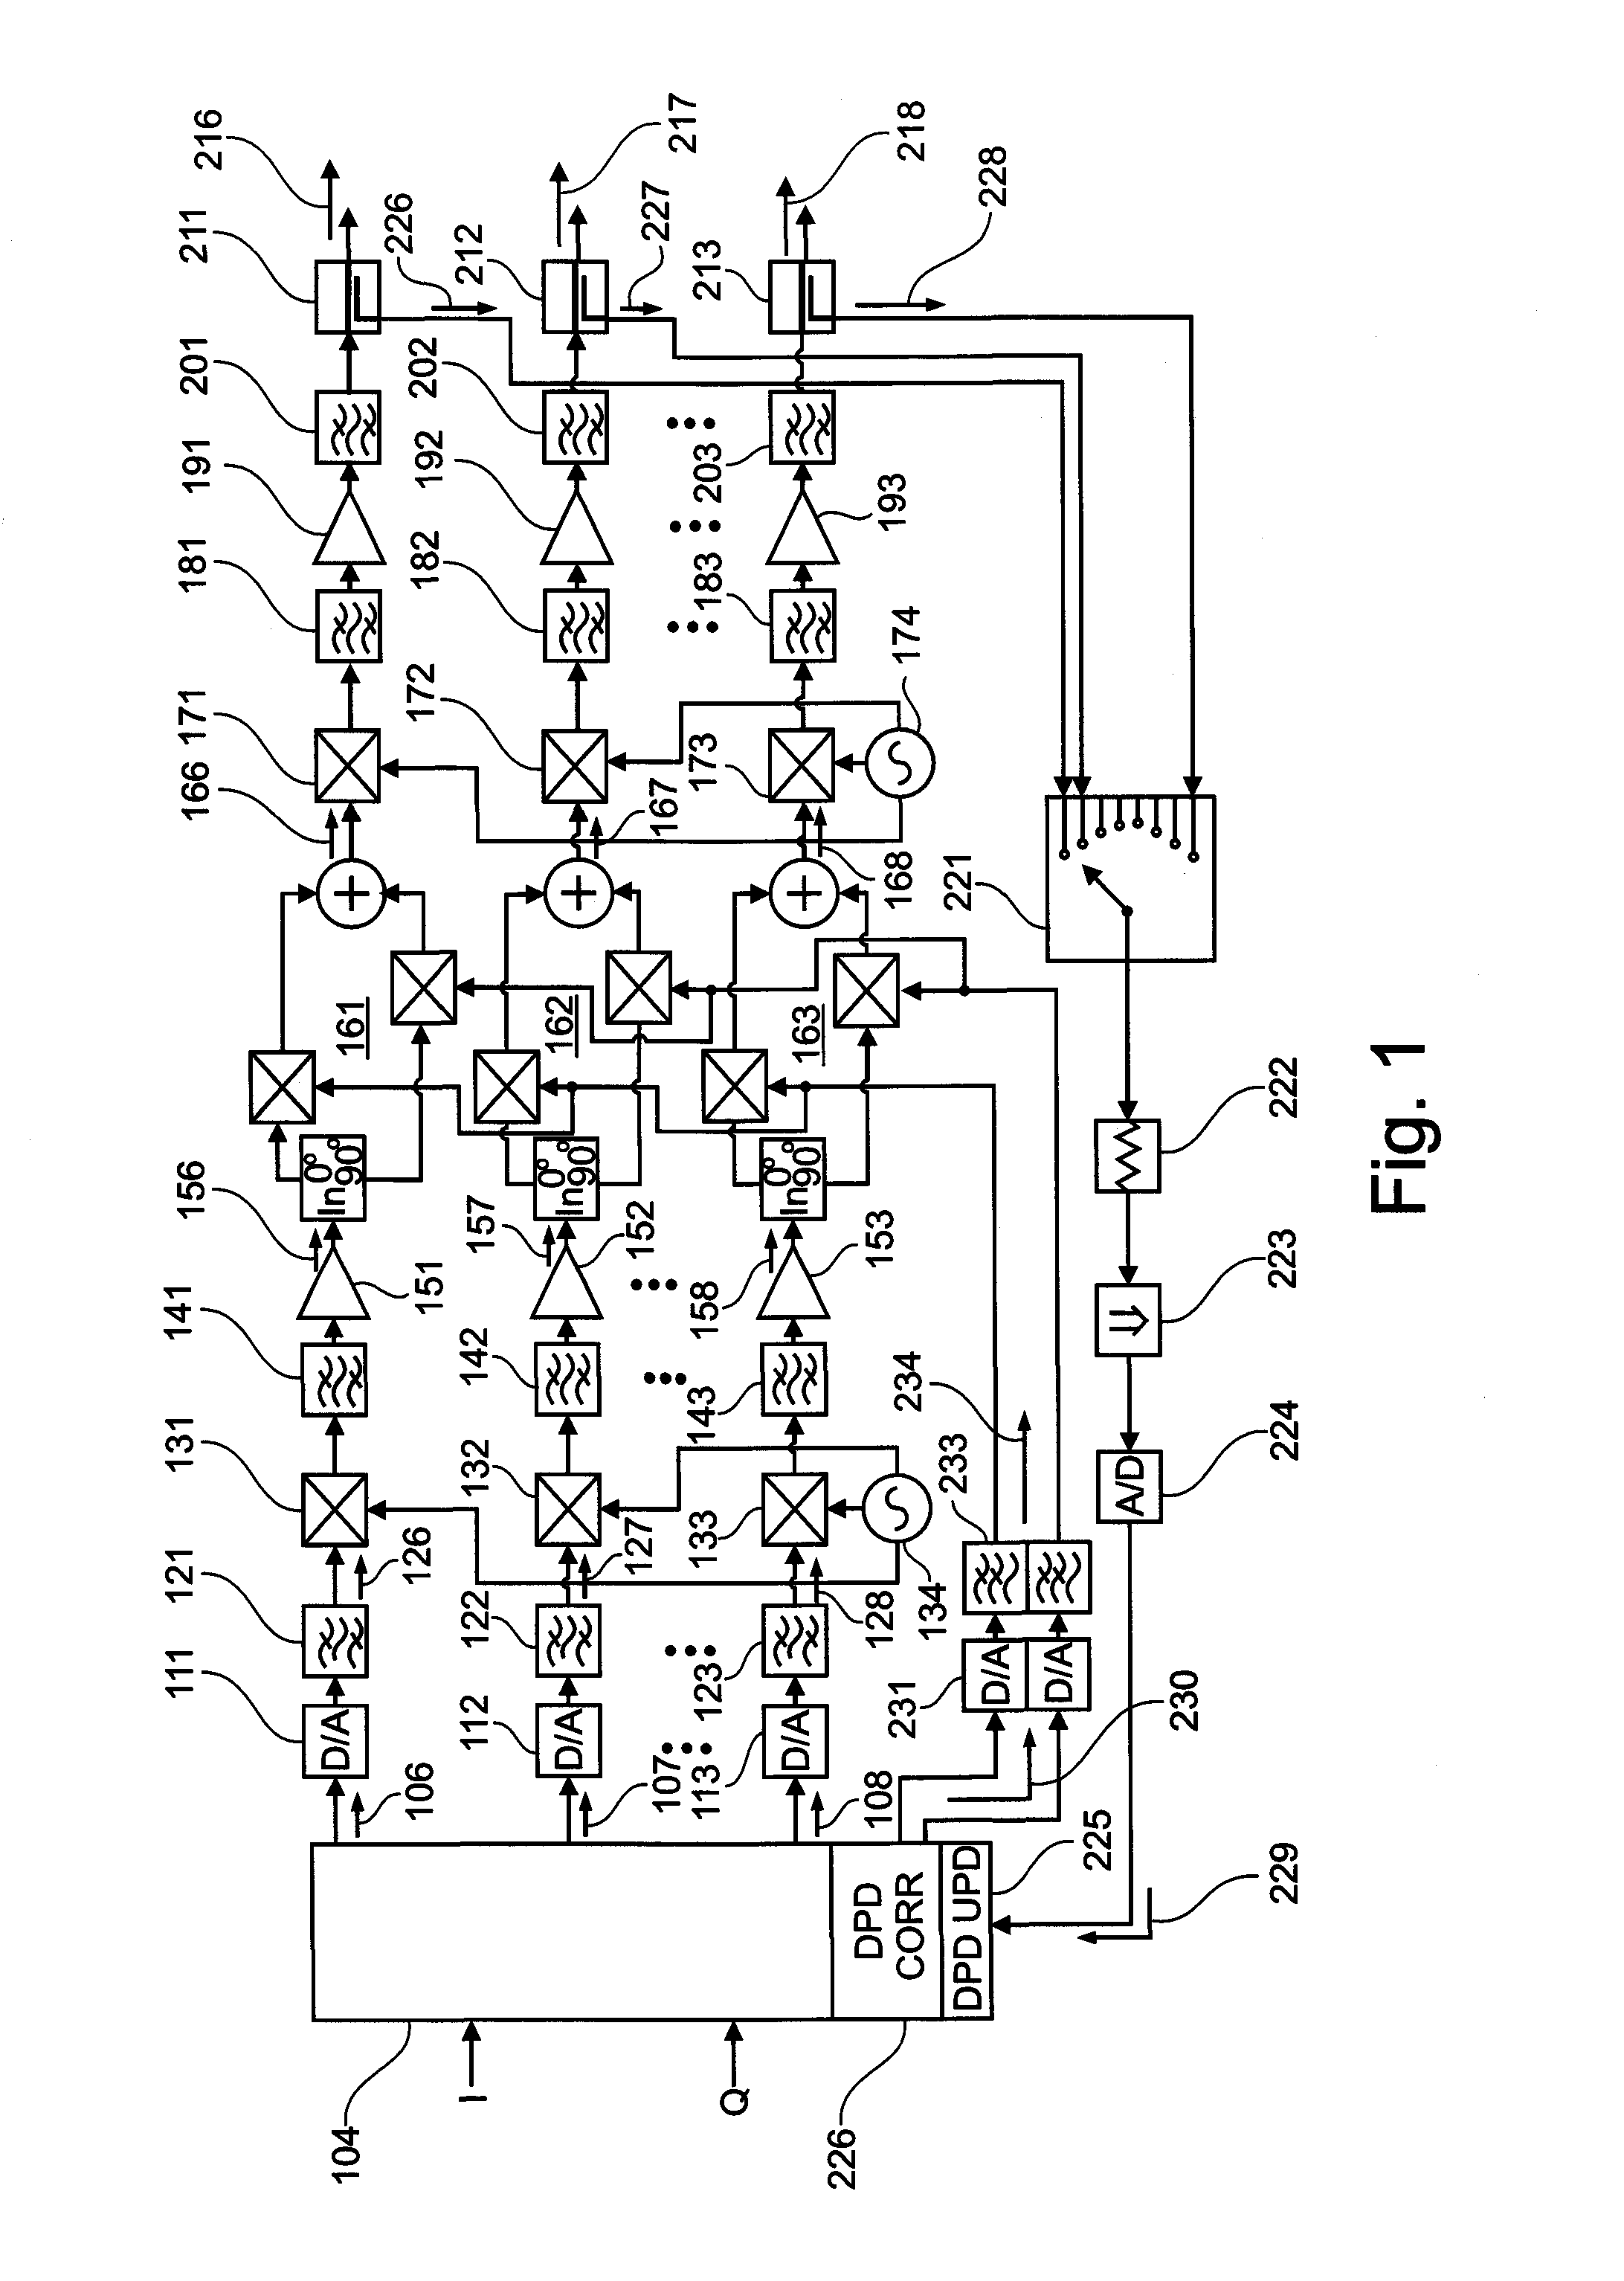 Active antenna array with modulator-based pre-distortion